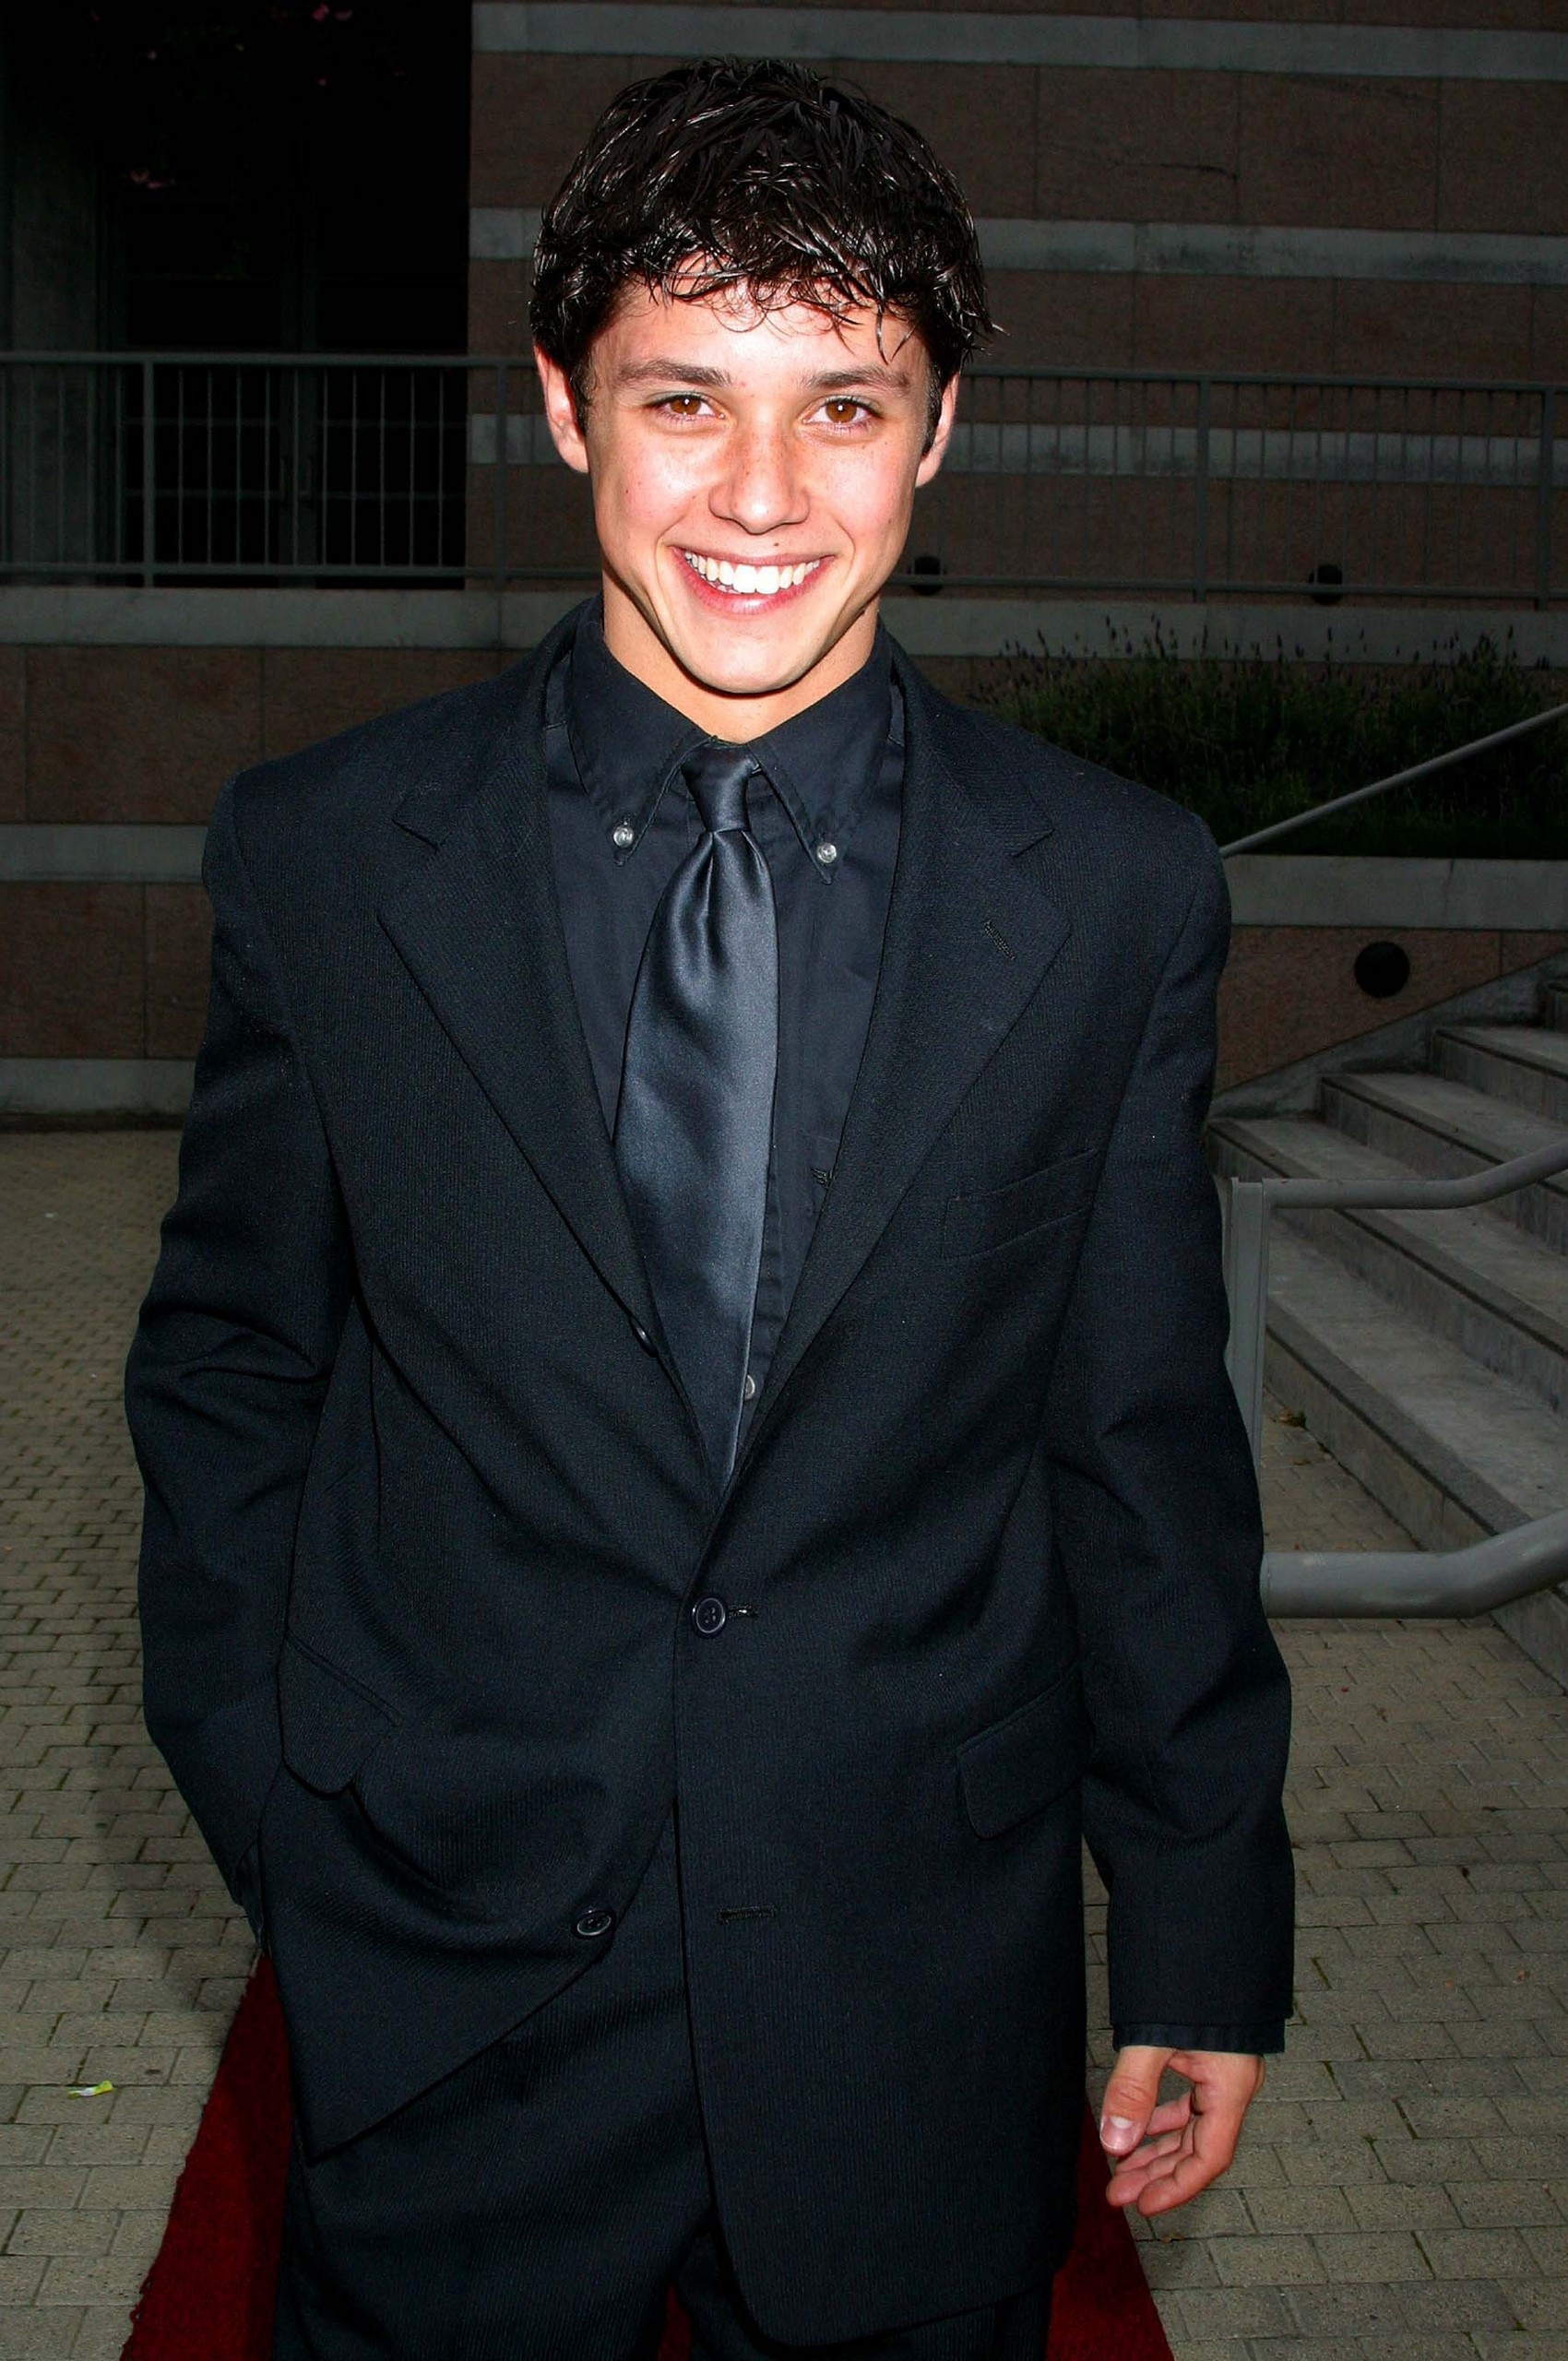 ricky ullman, images, image, wallpaper, photos, photo, photograph, gallery,...